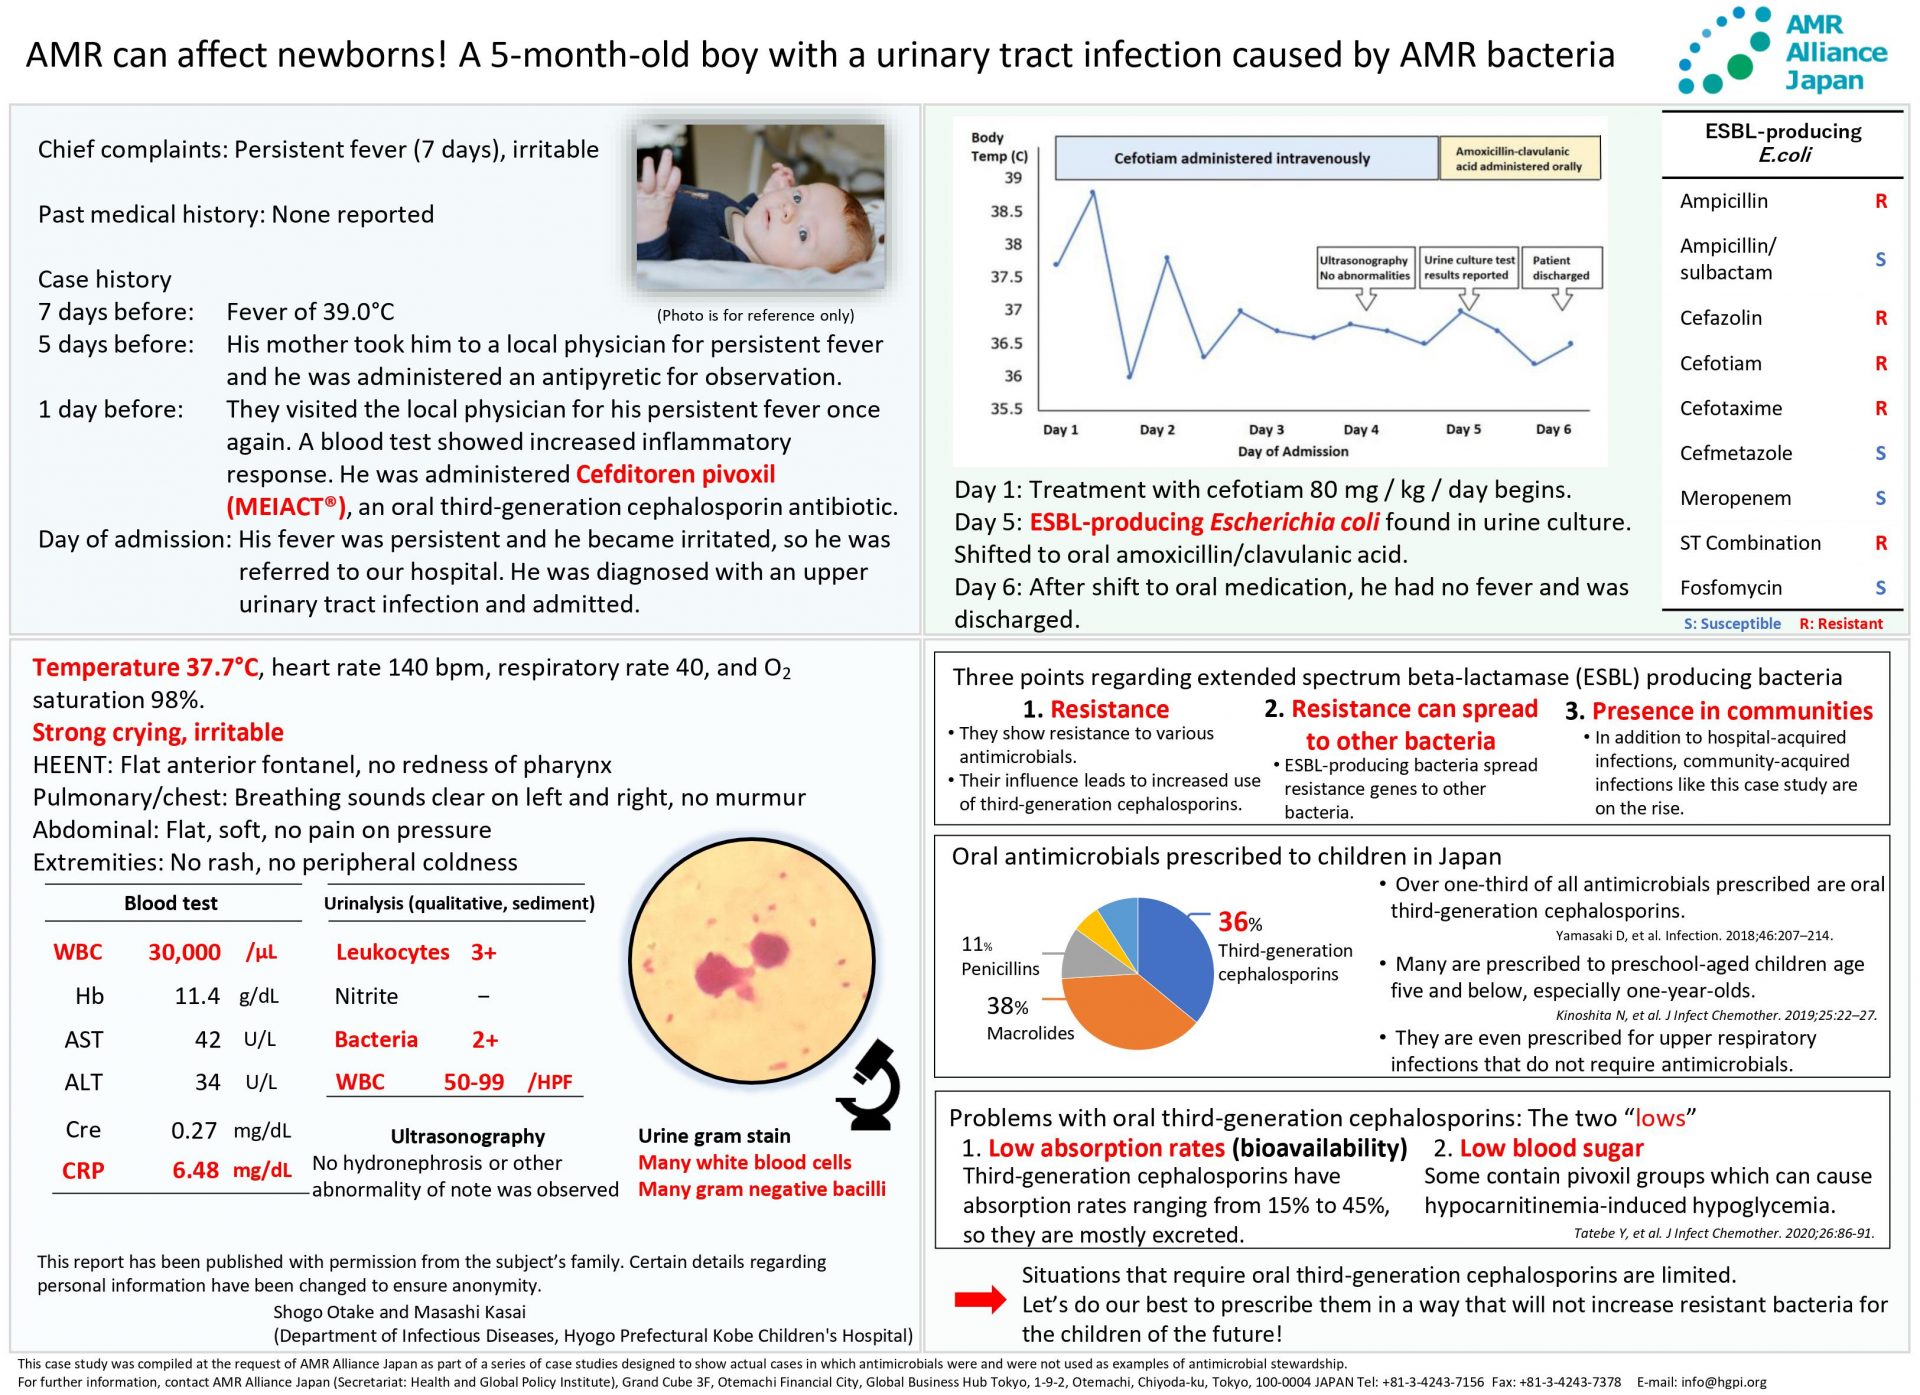 [Case Study] Shogo Otake and Masashi Kasai “AMR can affect newborns! A 5-month-old boy with a urinary tract infection caused by AMR bacteria” (AMR Alliance Japan, October 12, 2021)